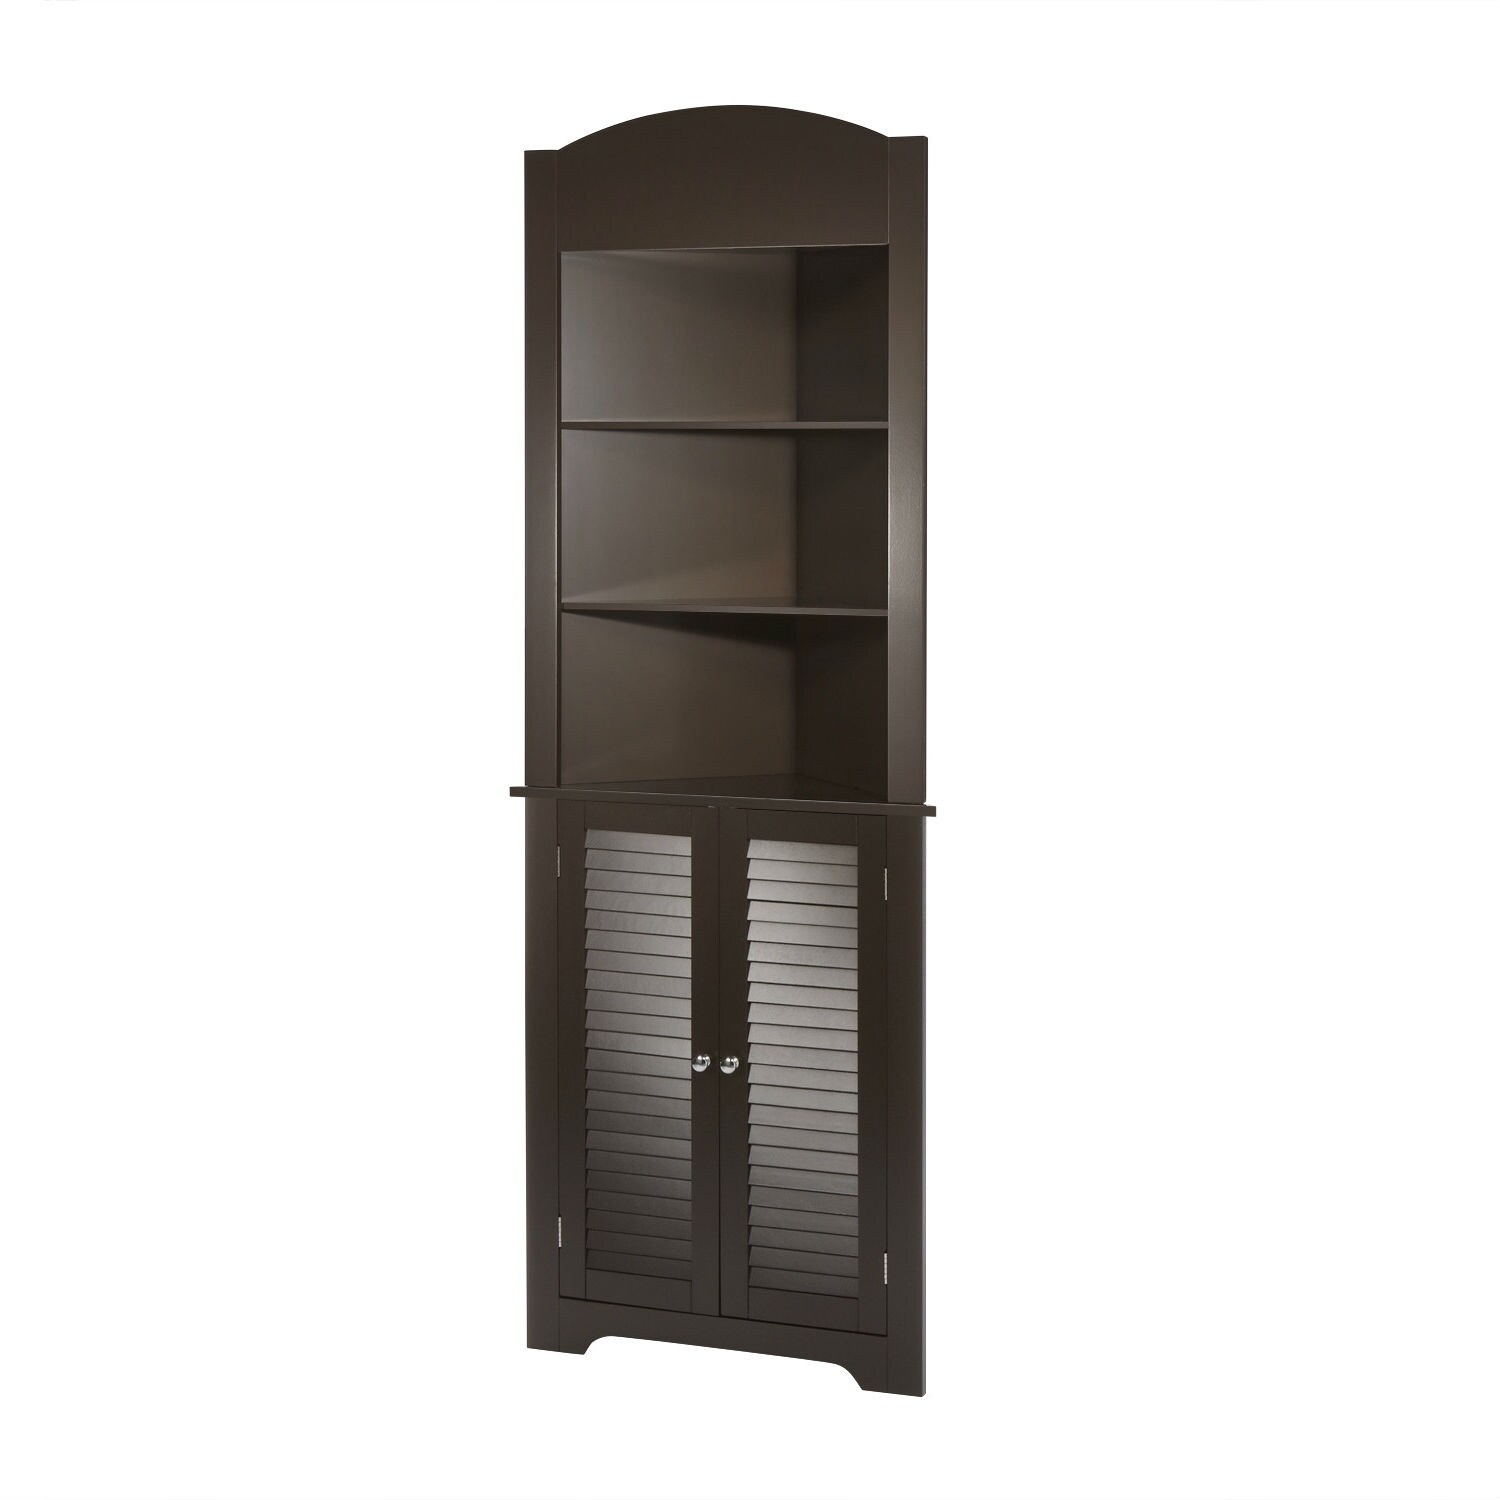 https://ak1.ostkcdn.com/images/products/is/images/direct/c618f4aff9243b8a4c2acf767040295147c99b3b/Espresso-Bathroom-Linen-Tower-Corner-Towel-Storage-Cabinet-with-3-Open-Shelves.jpg